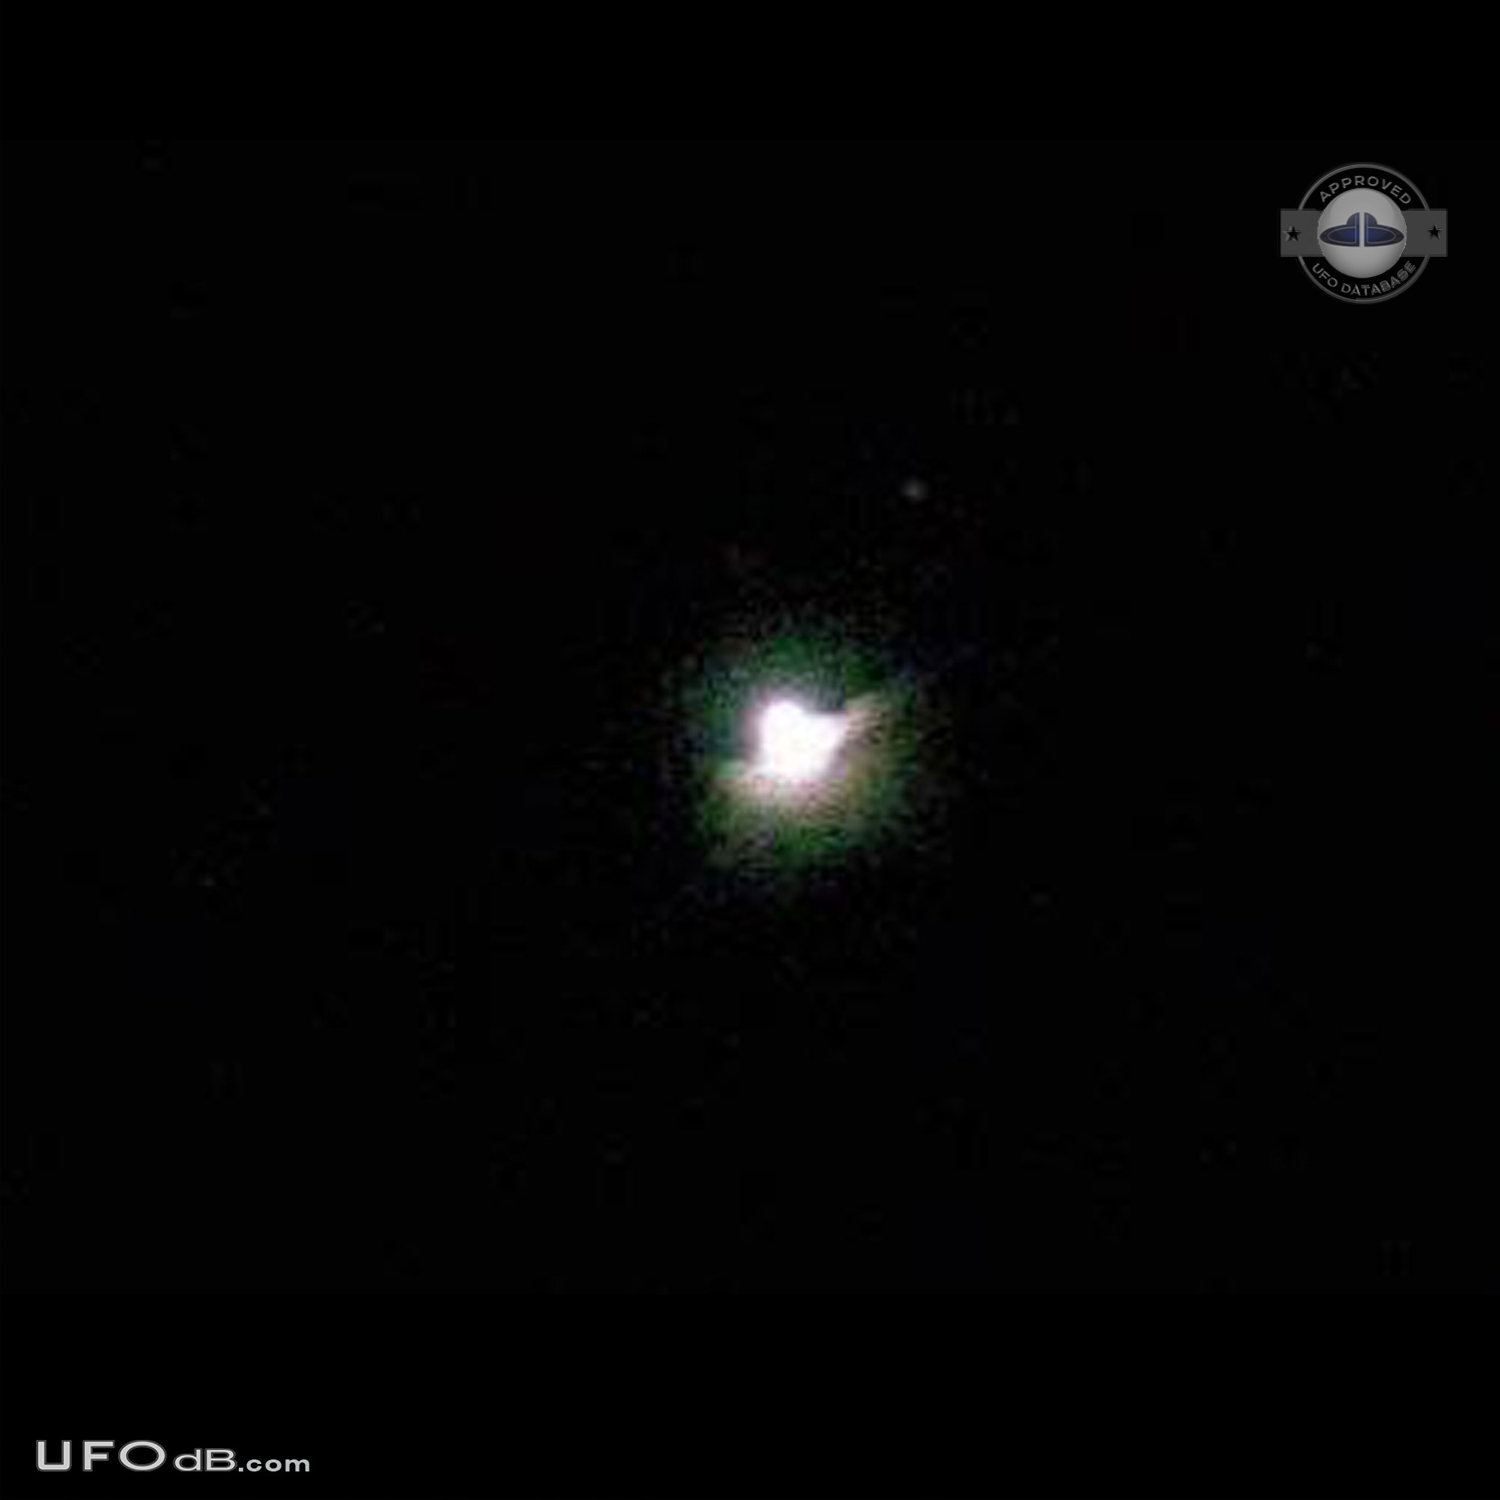 Bright UFO in the night sky of Herning Denmark caught on picture 2007 UFO Picture #445-1